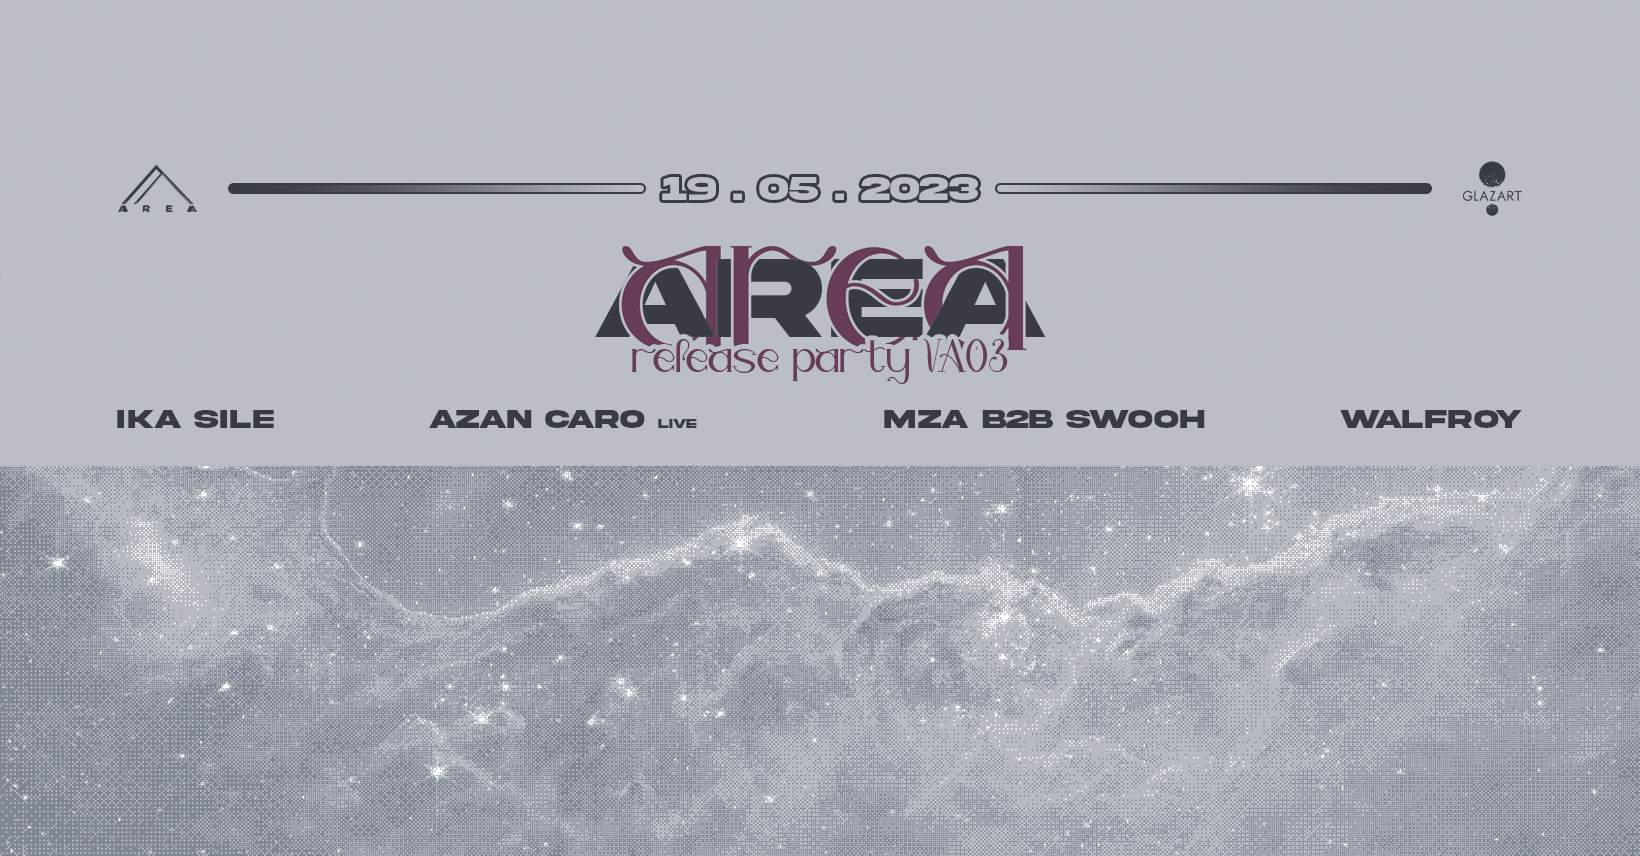 AREA RELEASE PARTY with MZA b2b Swooh, walfroy, IKA SILE, AZAN CARO - フライヤー表